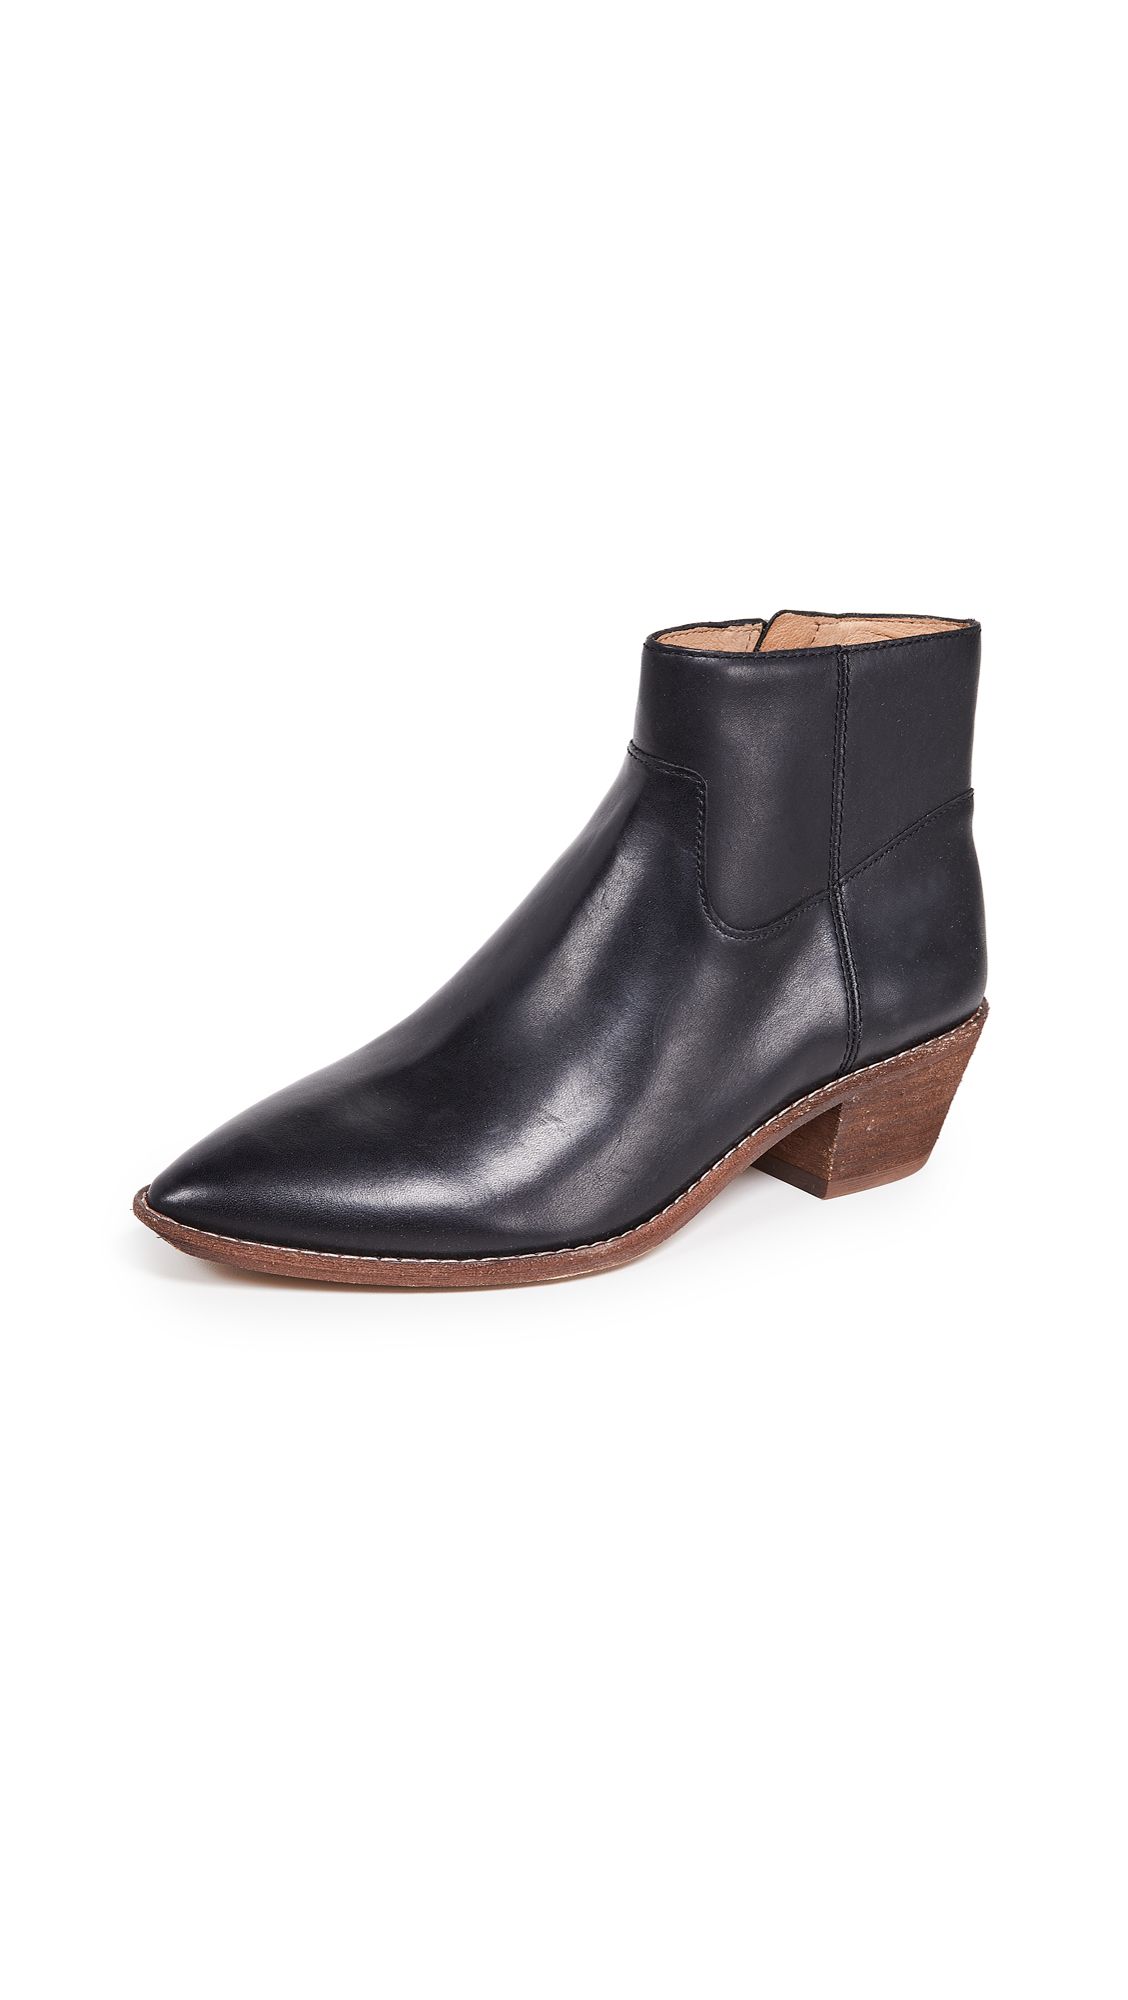 Madewell Charley Boots | Shopbop